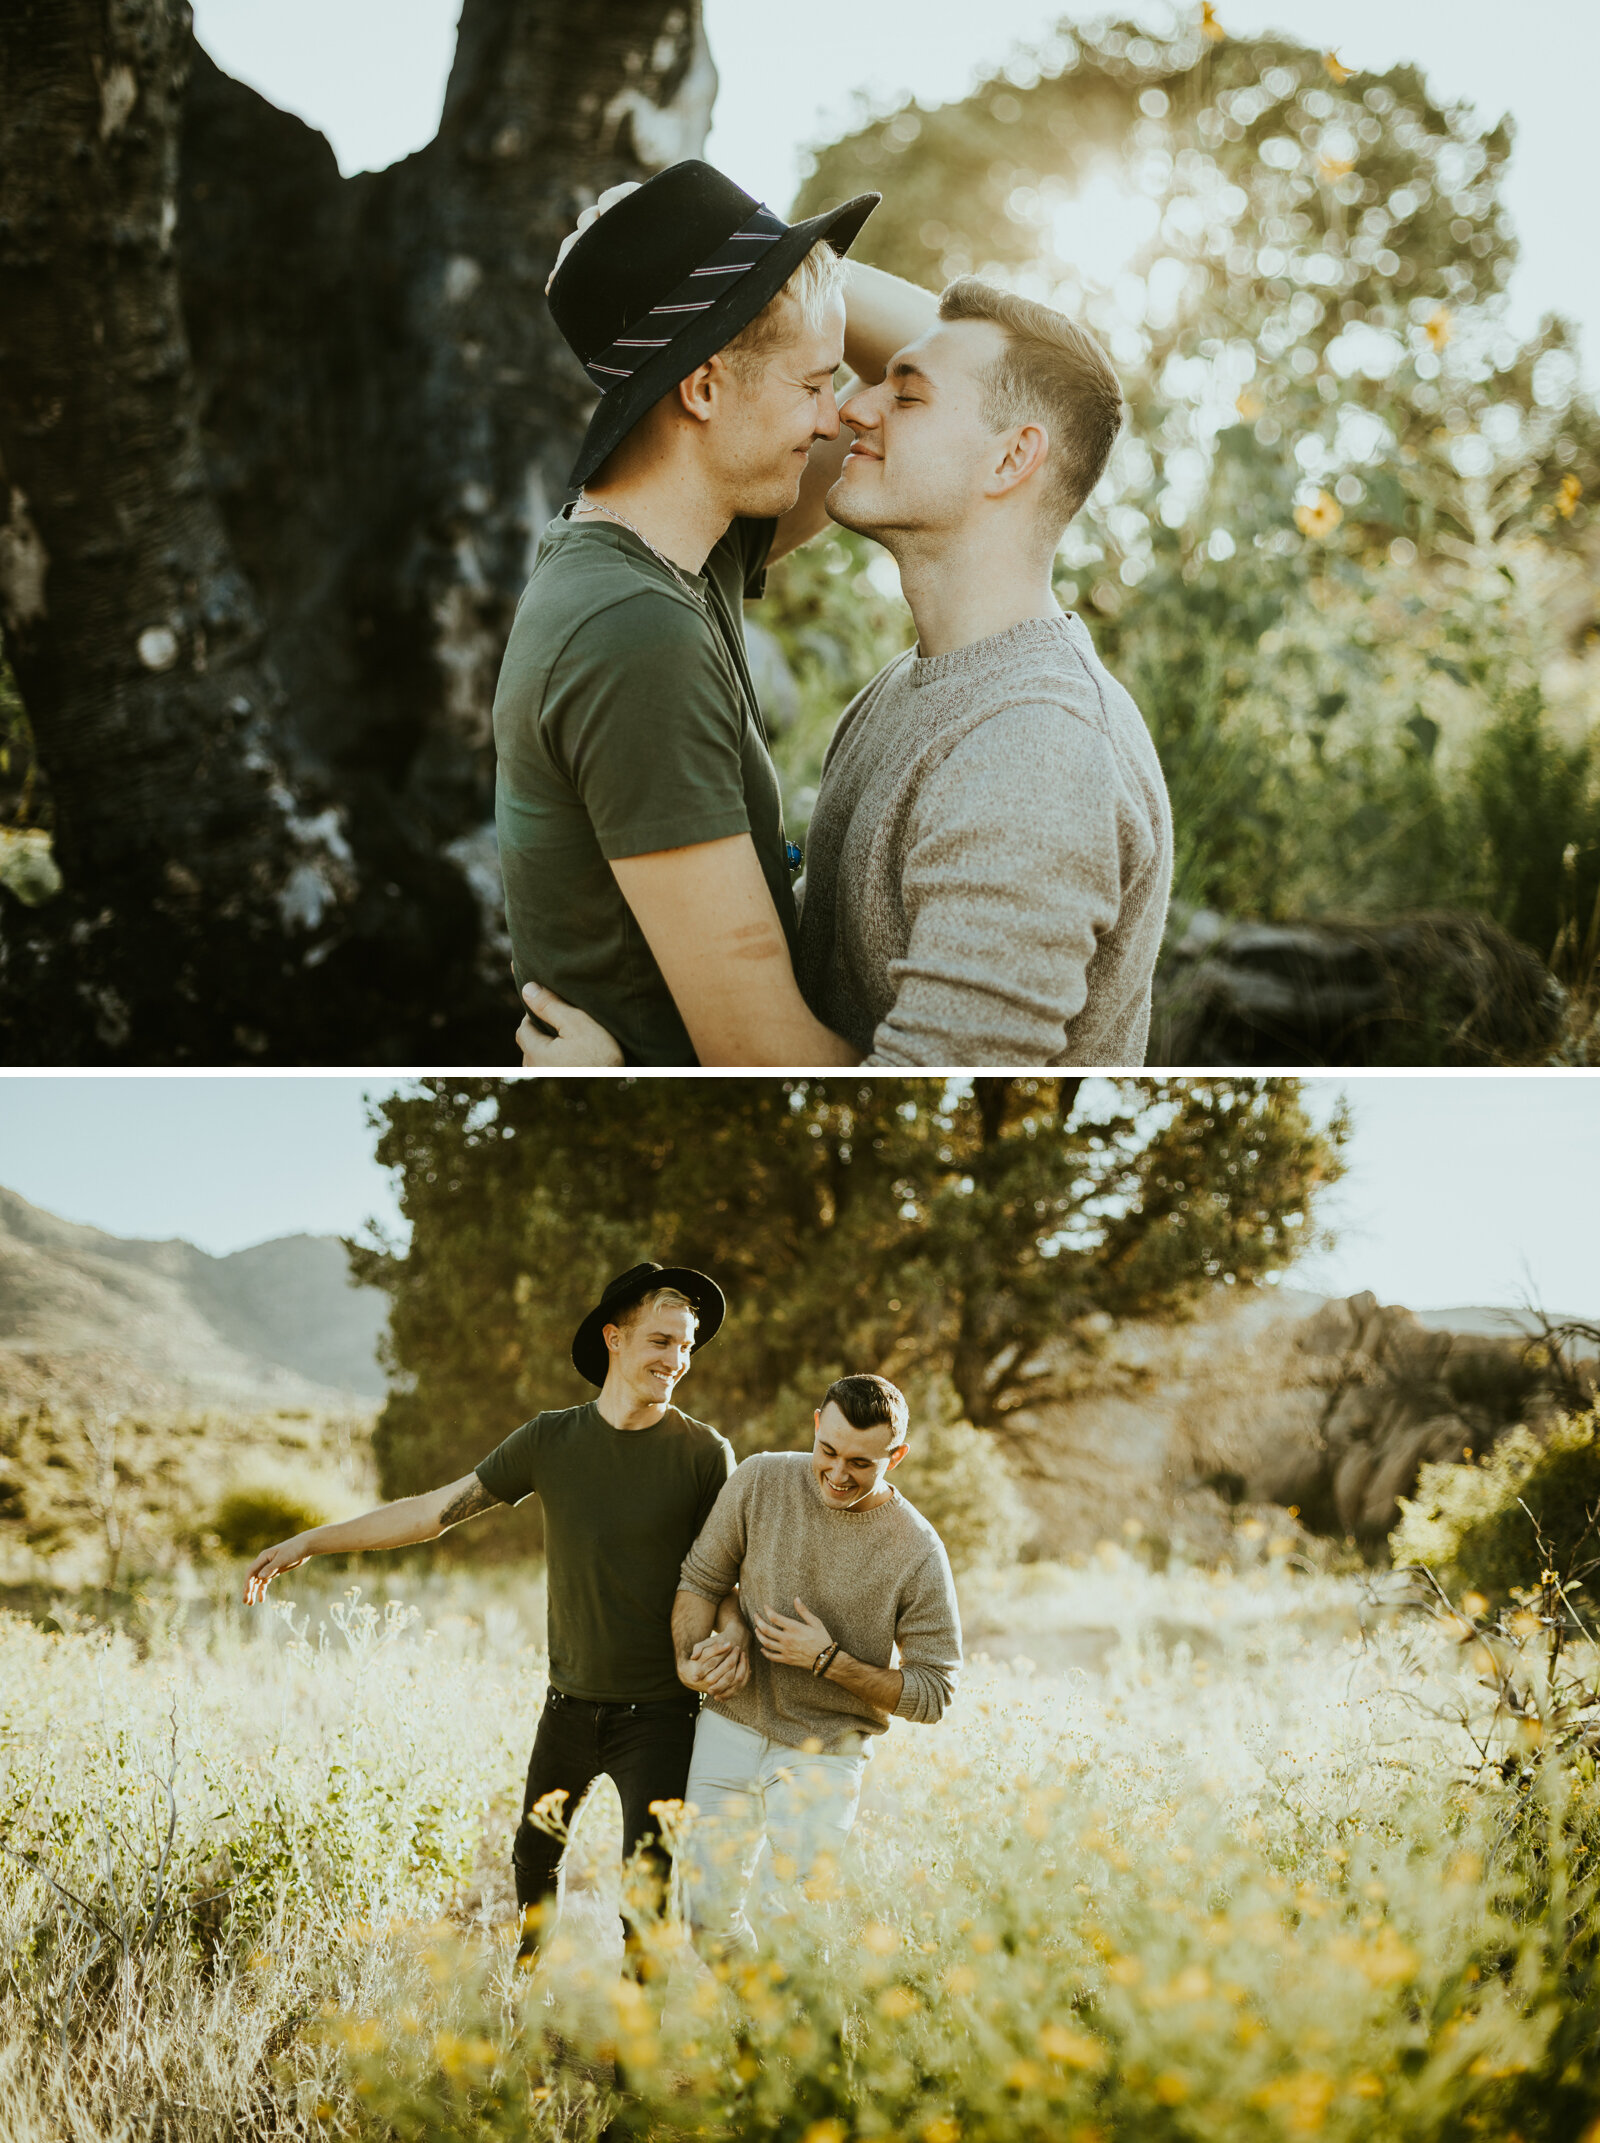 Couples - Ever Ever Photography - Couples and engagement photography